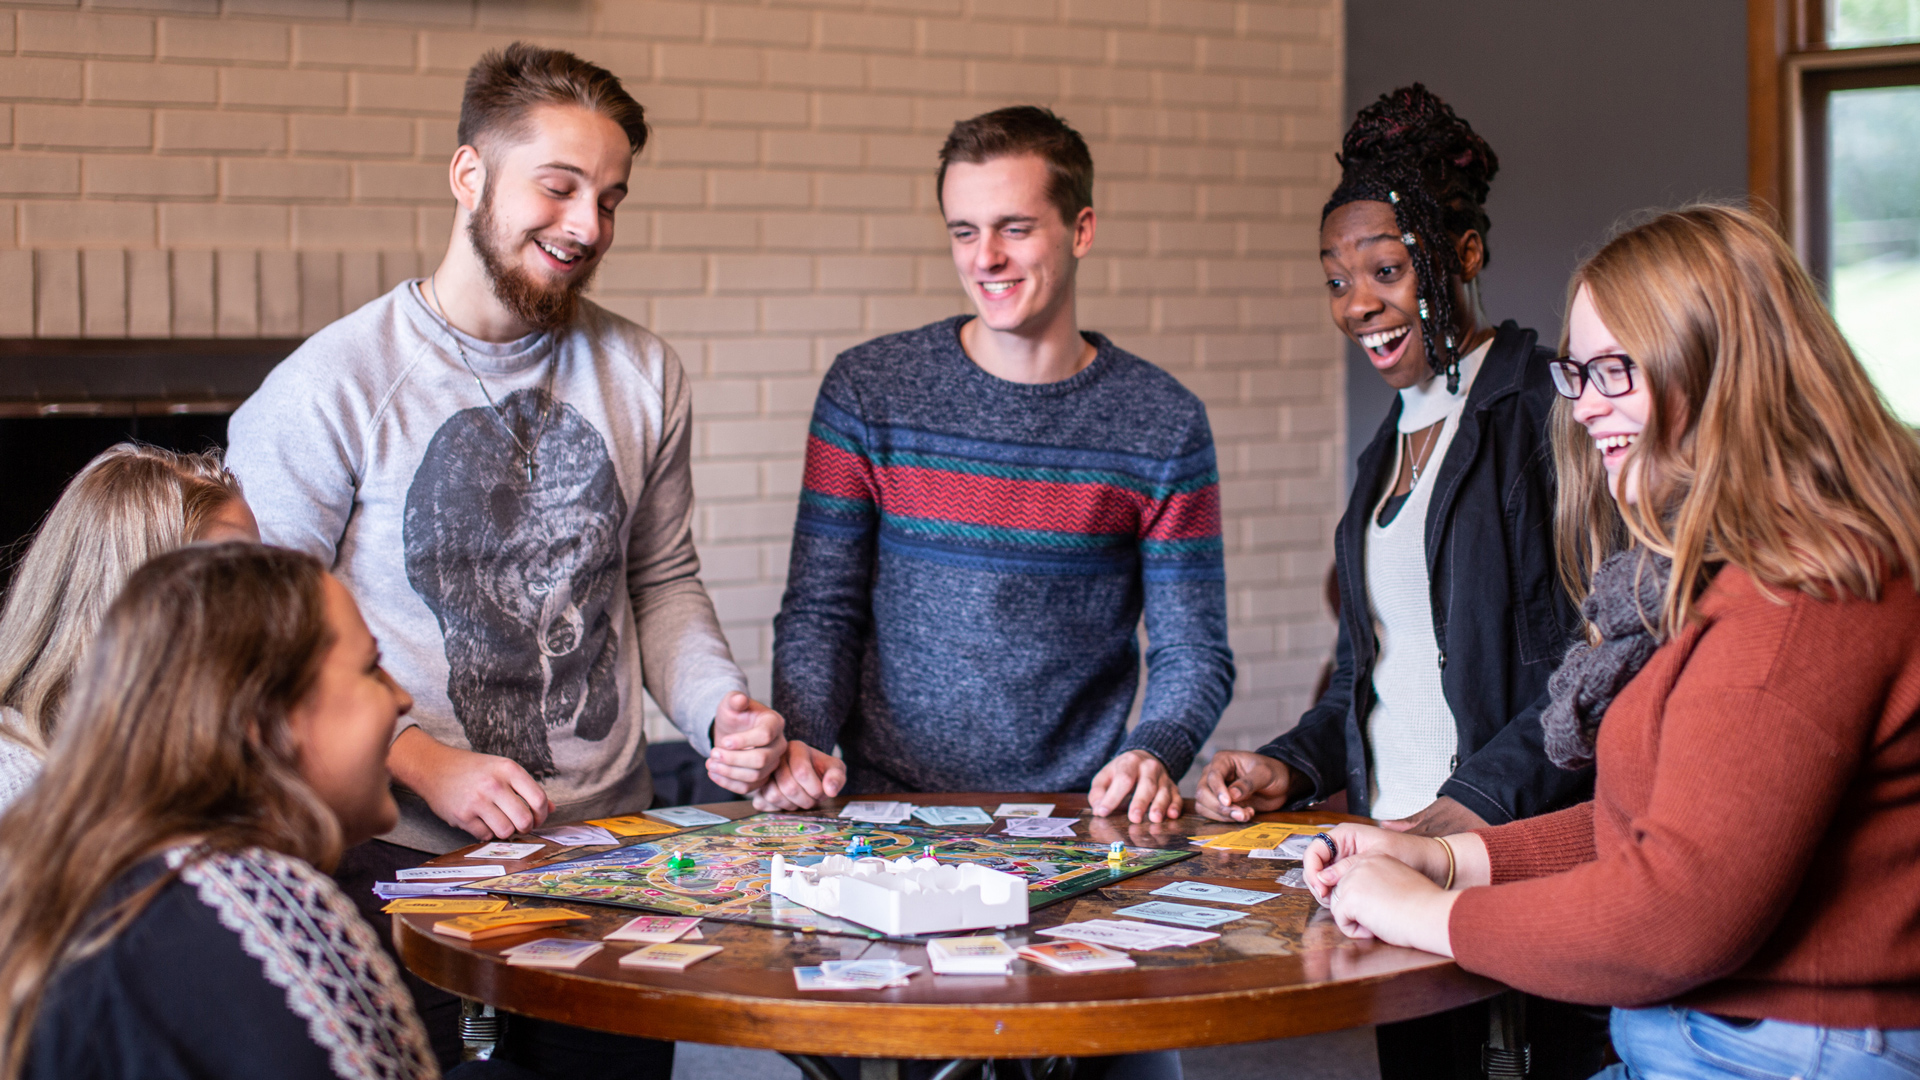 A diverse group of On-Campus Grace Students around a table playing a board game.